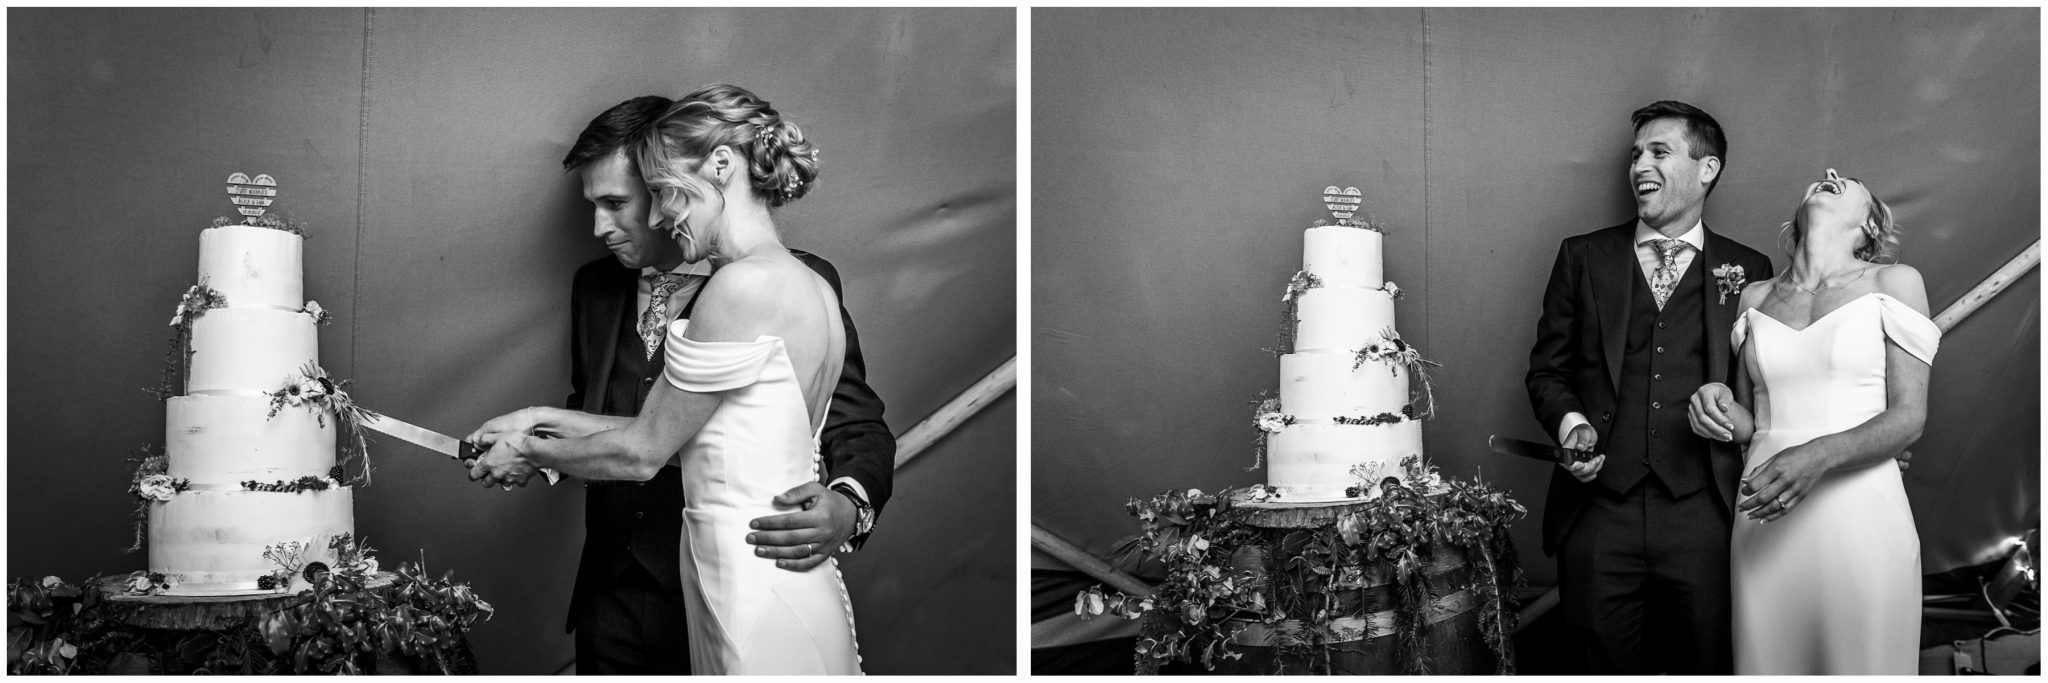 Black and whote photographs of bride and groom cutting the wedding cake